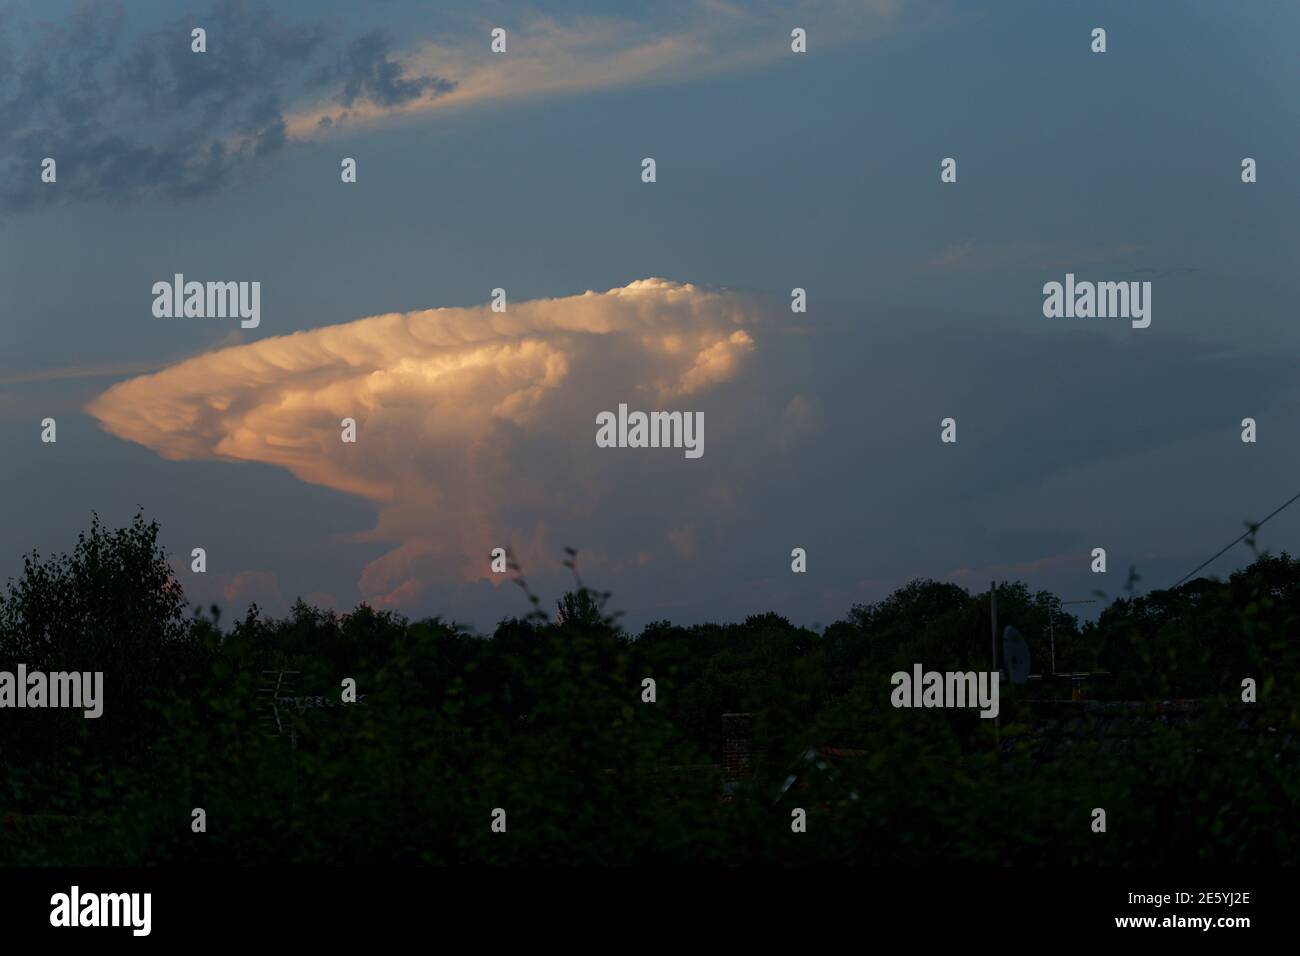 Distant thunder cloud in the classic anvil shape lit by a low evening sun Stock Photo